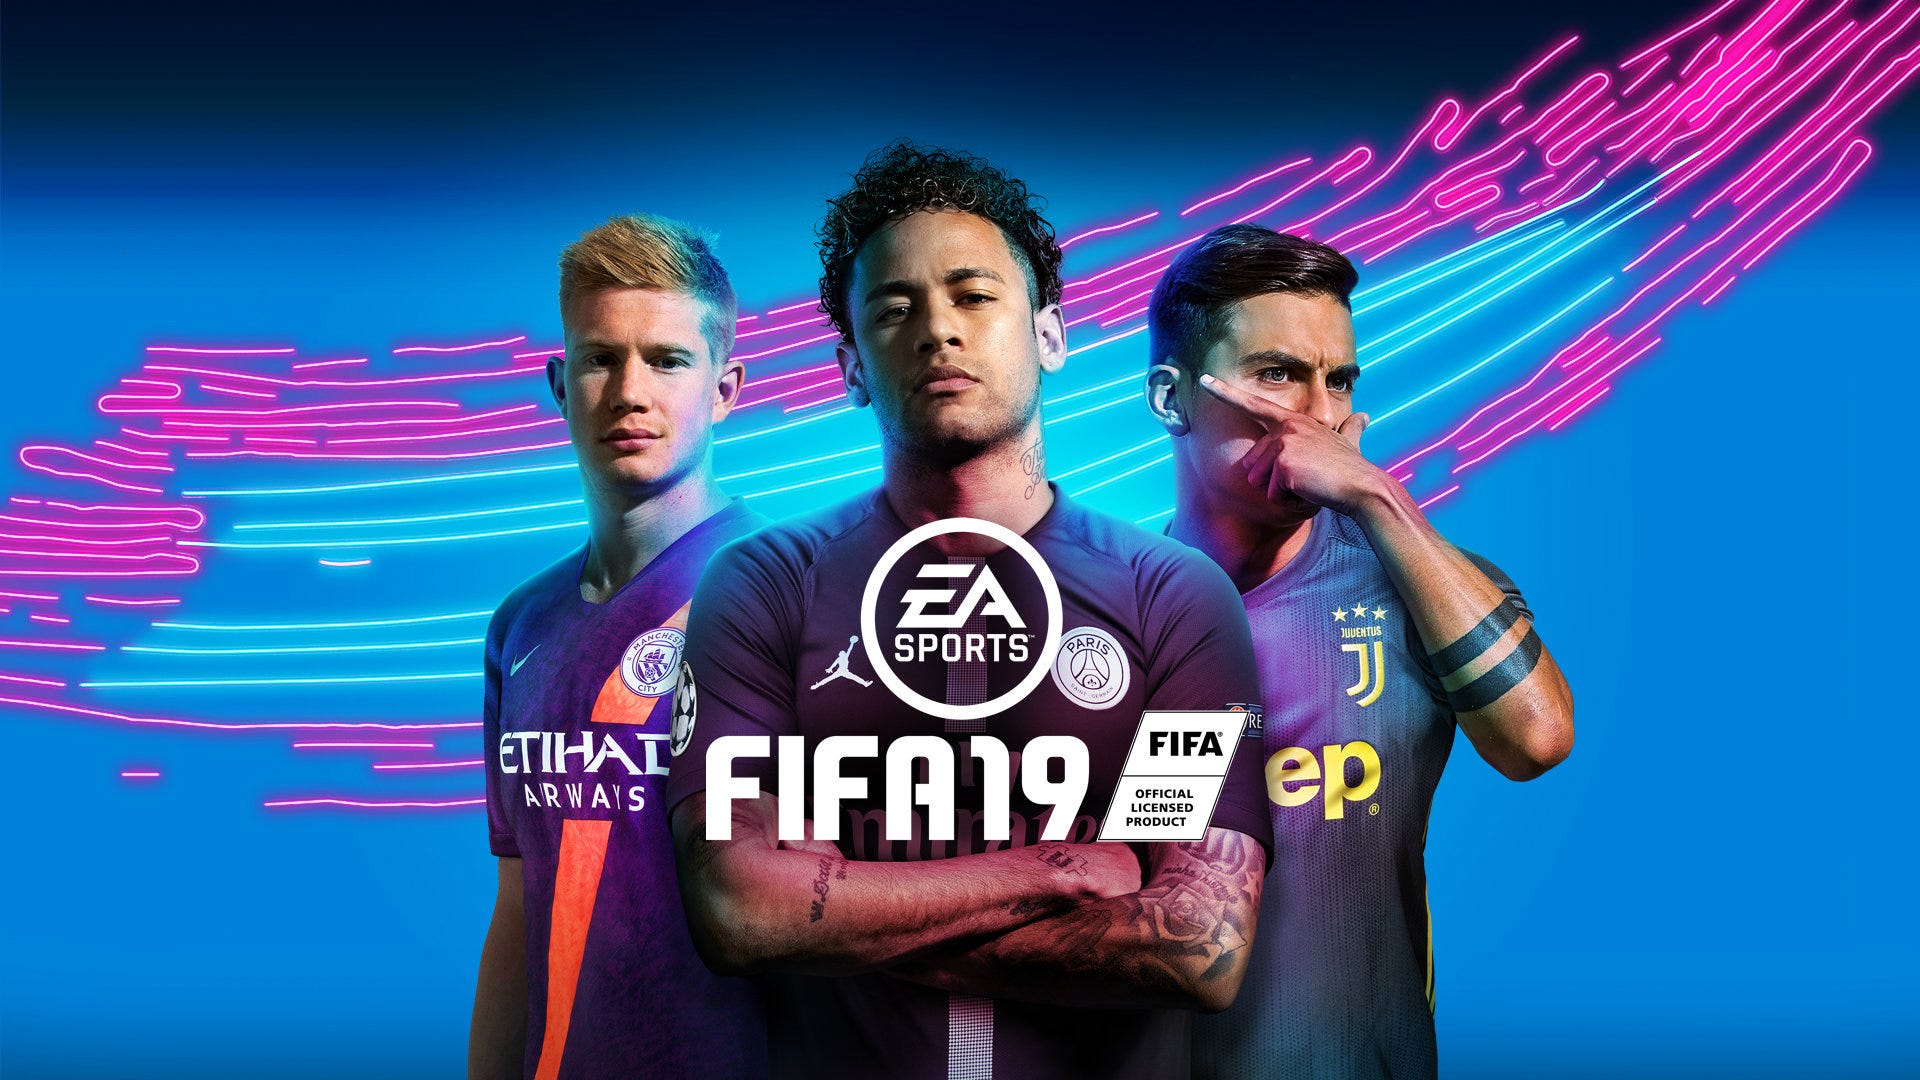 Customise your #FIFA22 cover with Leganés!